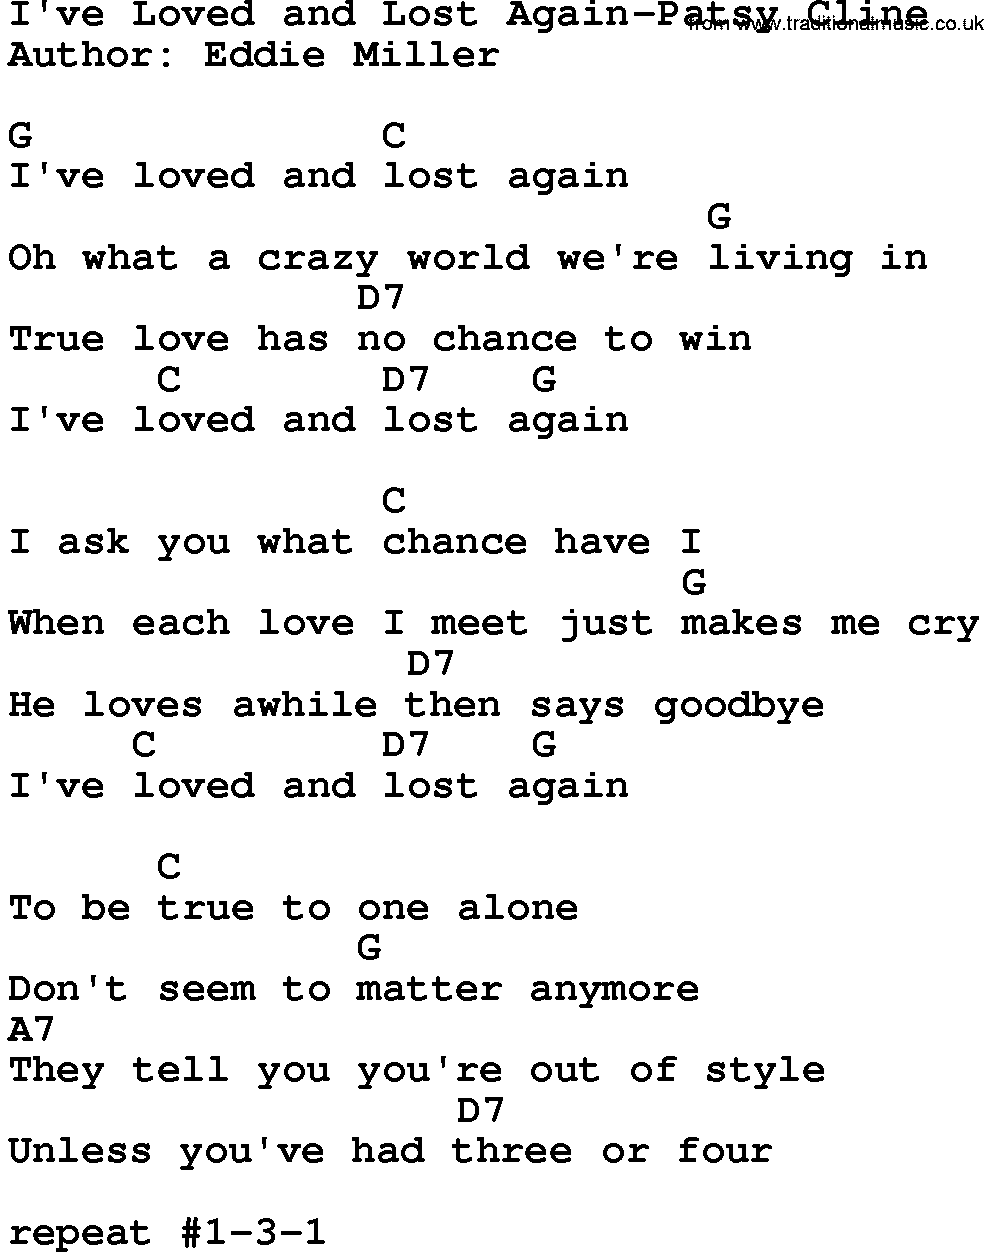 Country music song: I've Loved And Lost Again-Patsy Cline lyrics and chords